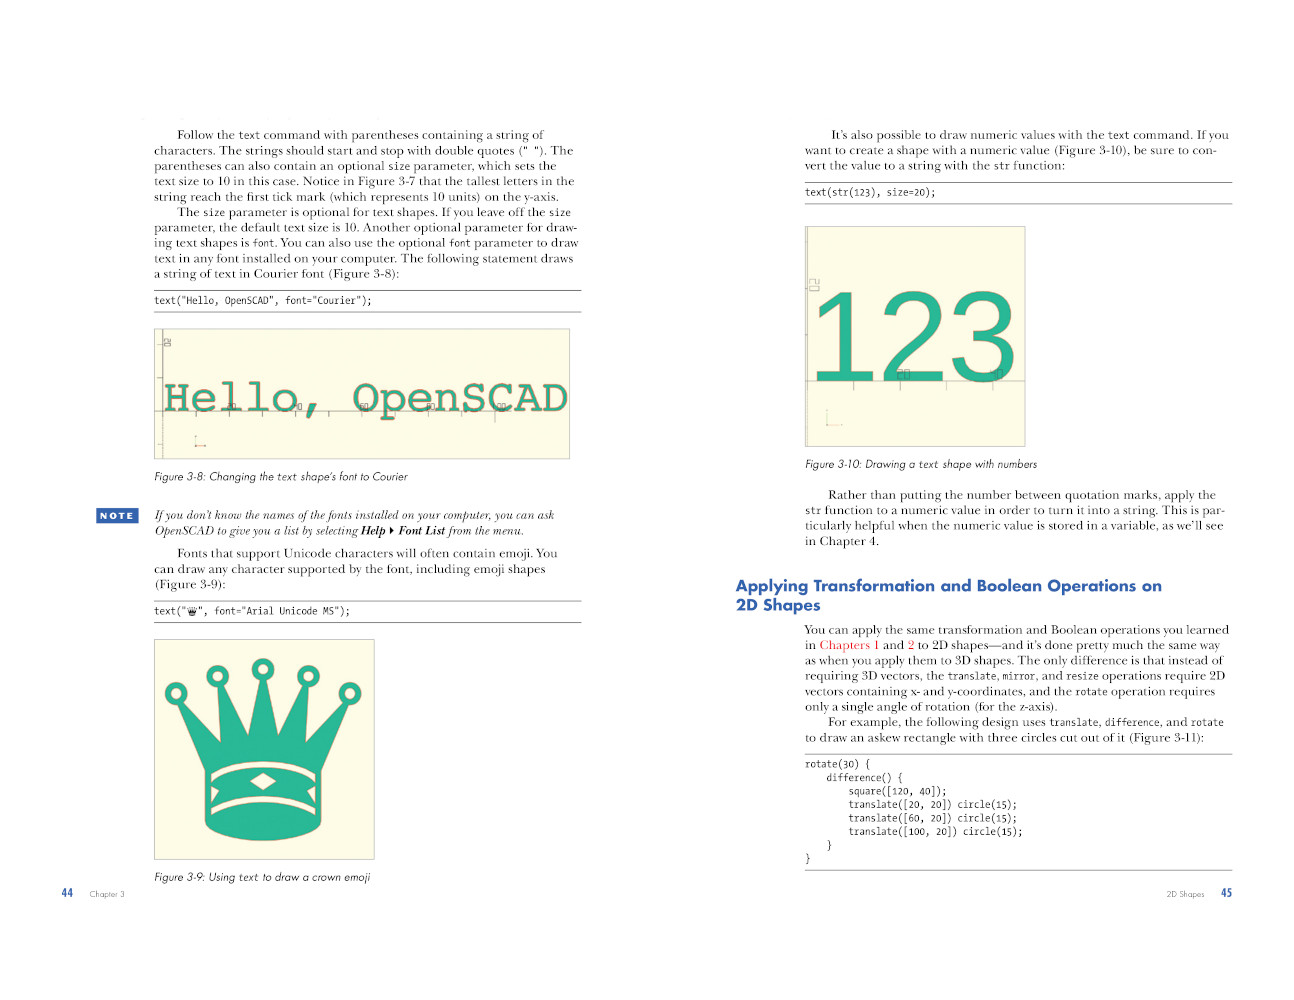 Programming with OpenSCAD pages 44-45